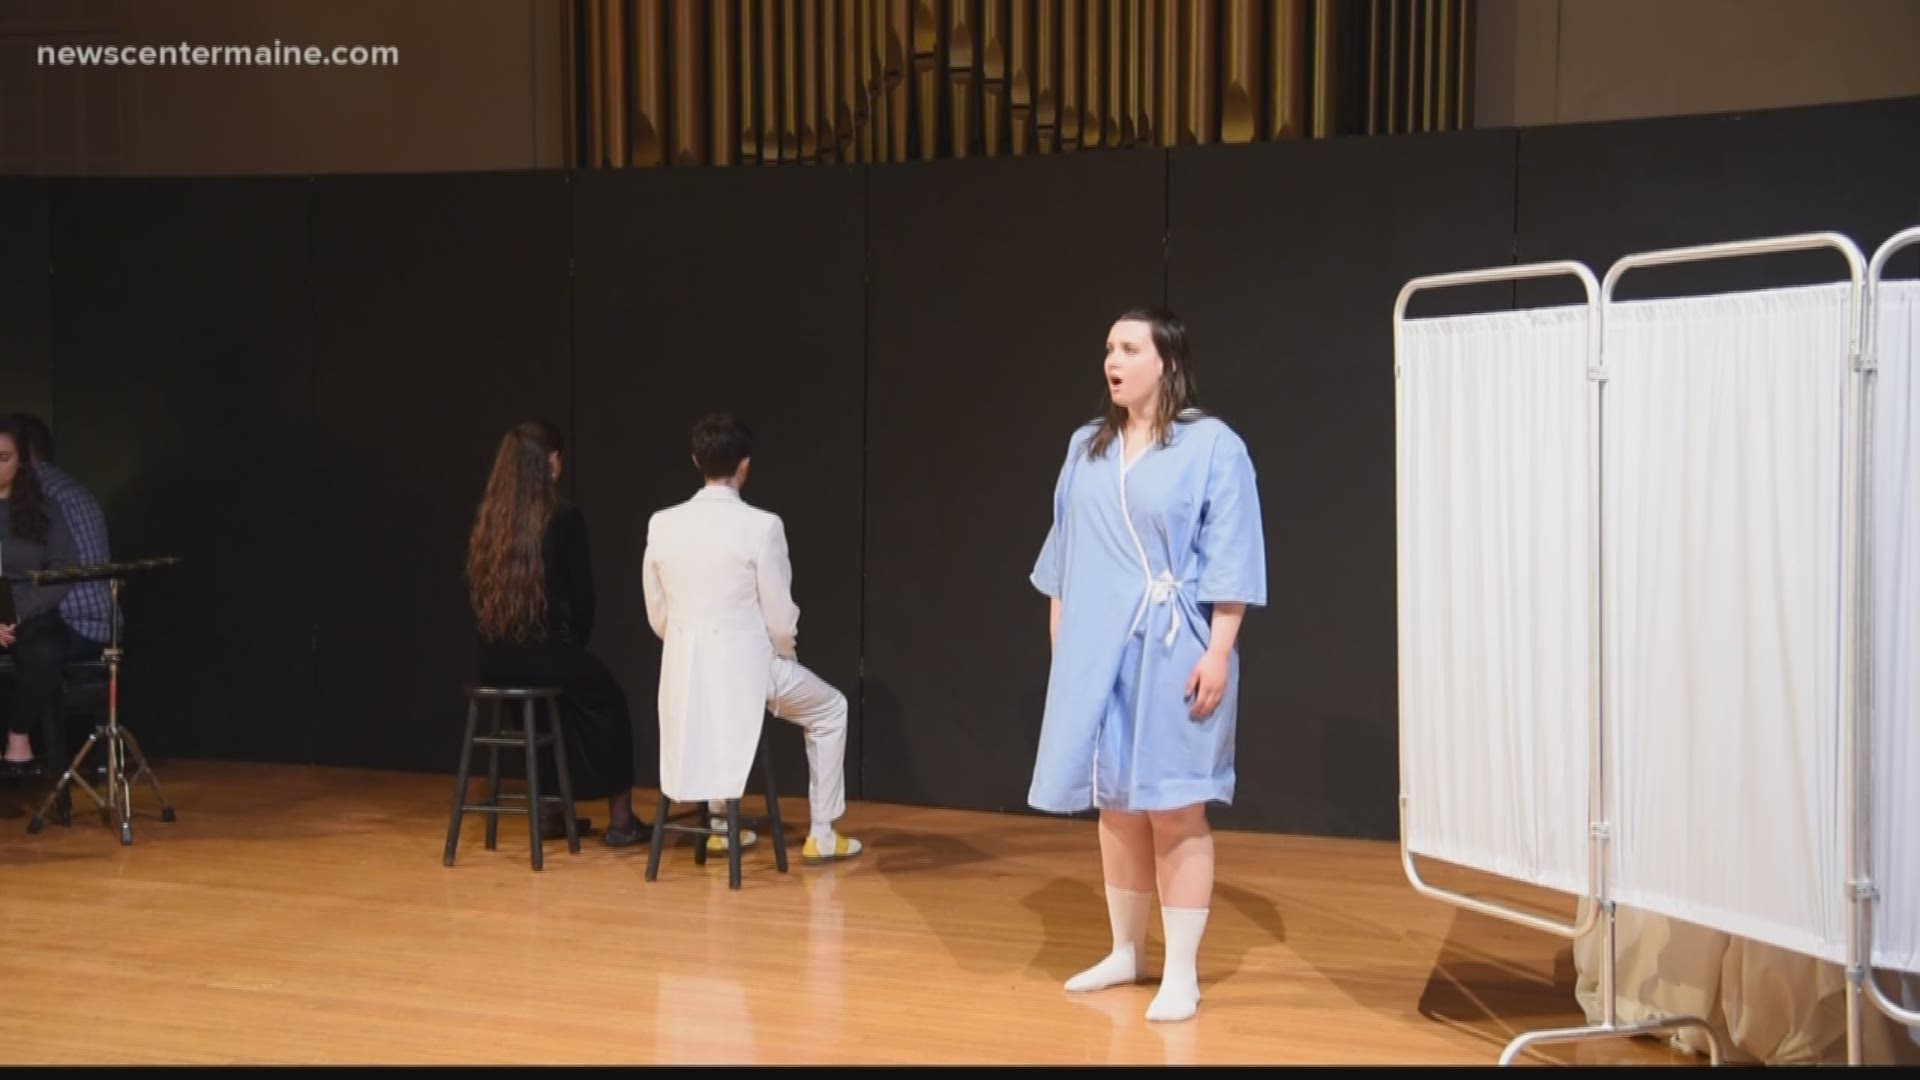 From 12 to 16-years-old, seven young girls have created a one-act libretto about the struggle to find your voice.